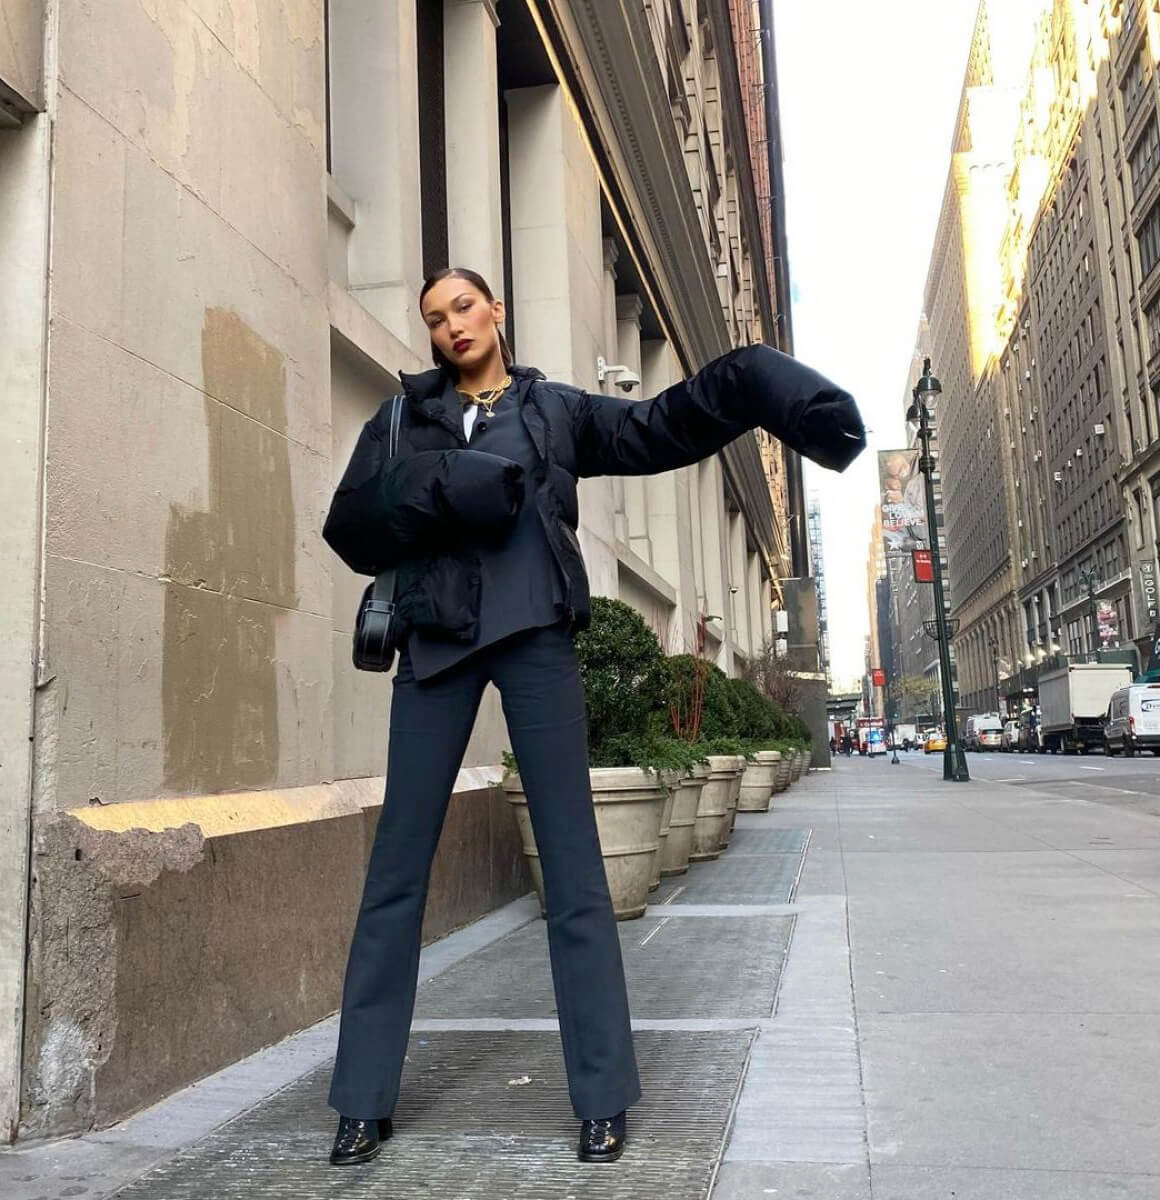 Bella Hadid in Fully Black Outfit - Instagram Photos 12/04/2020